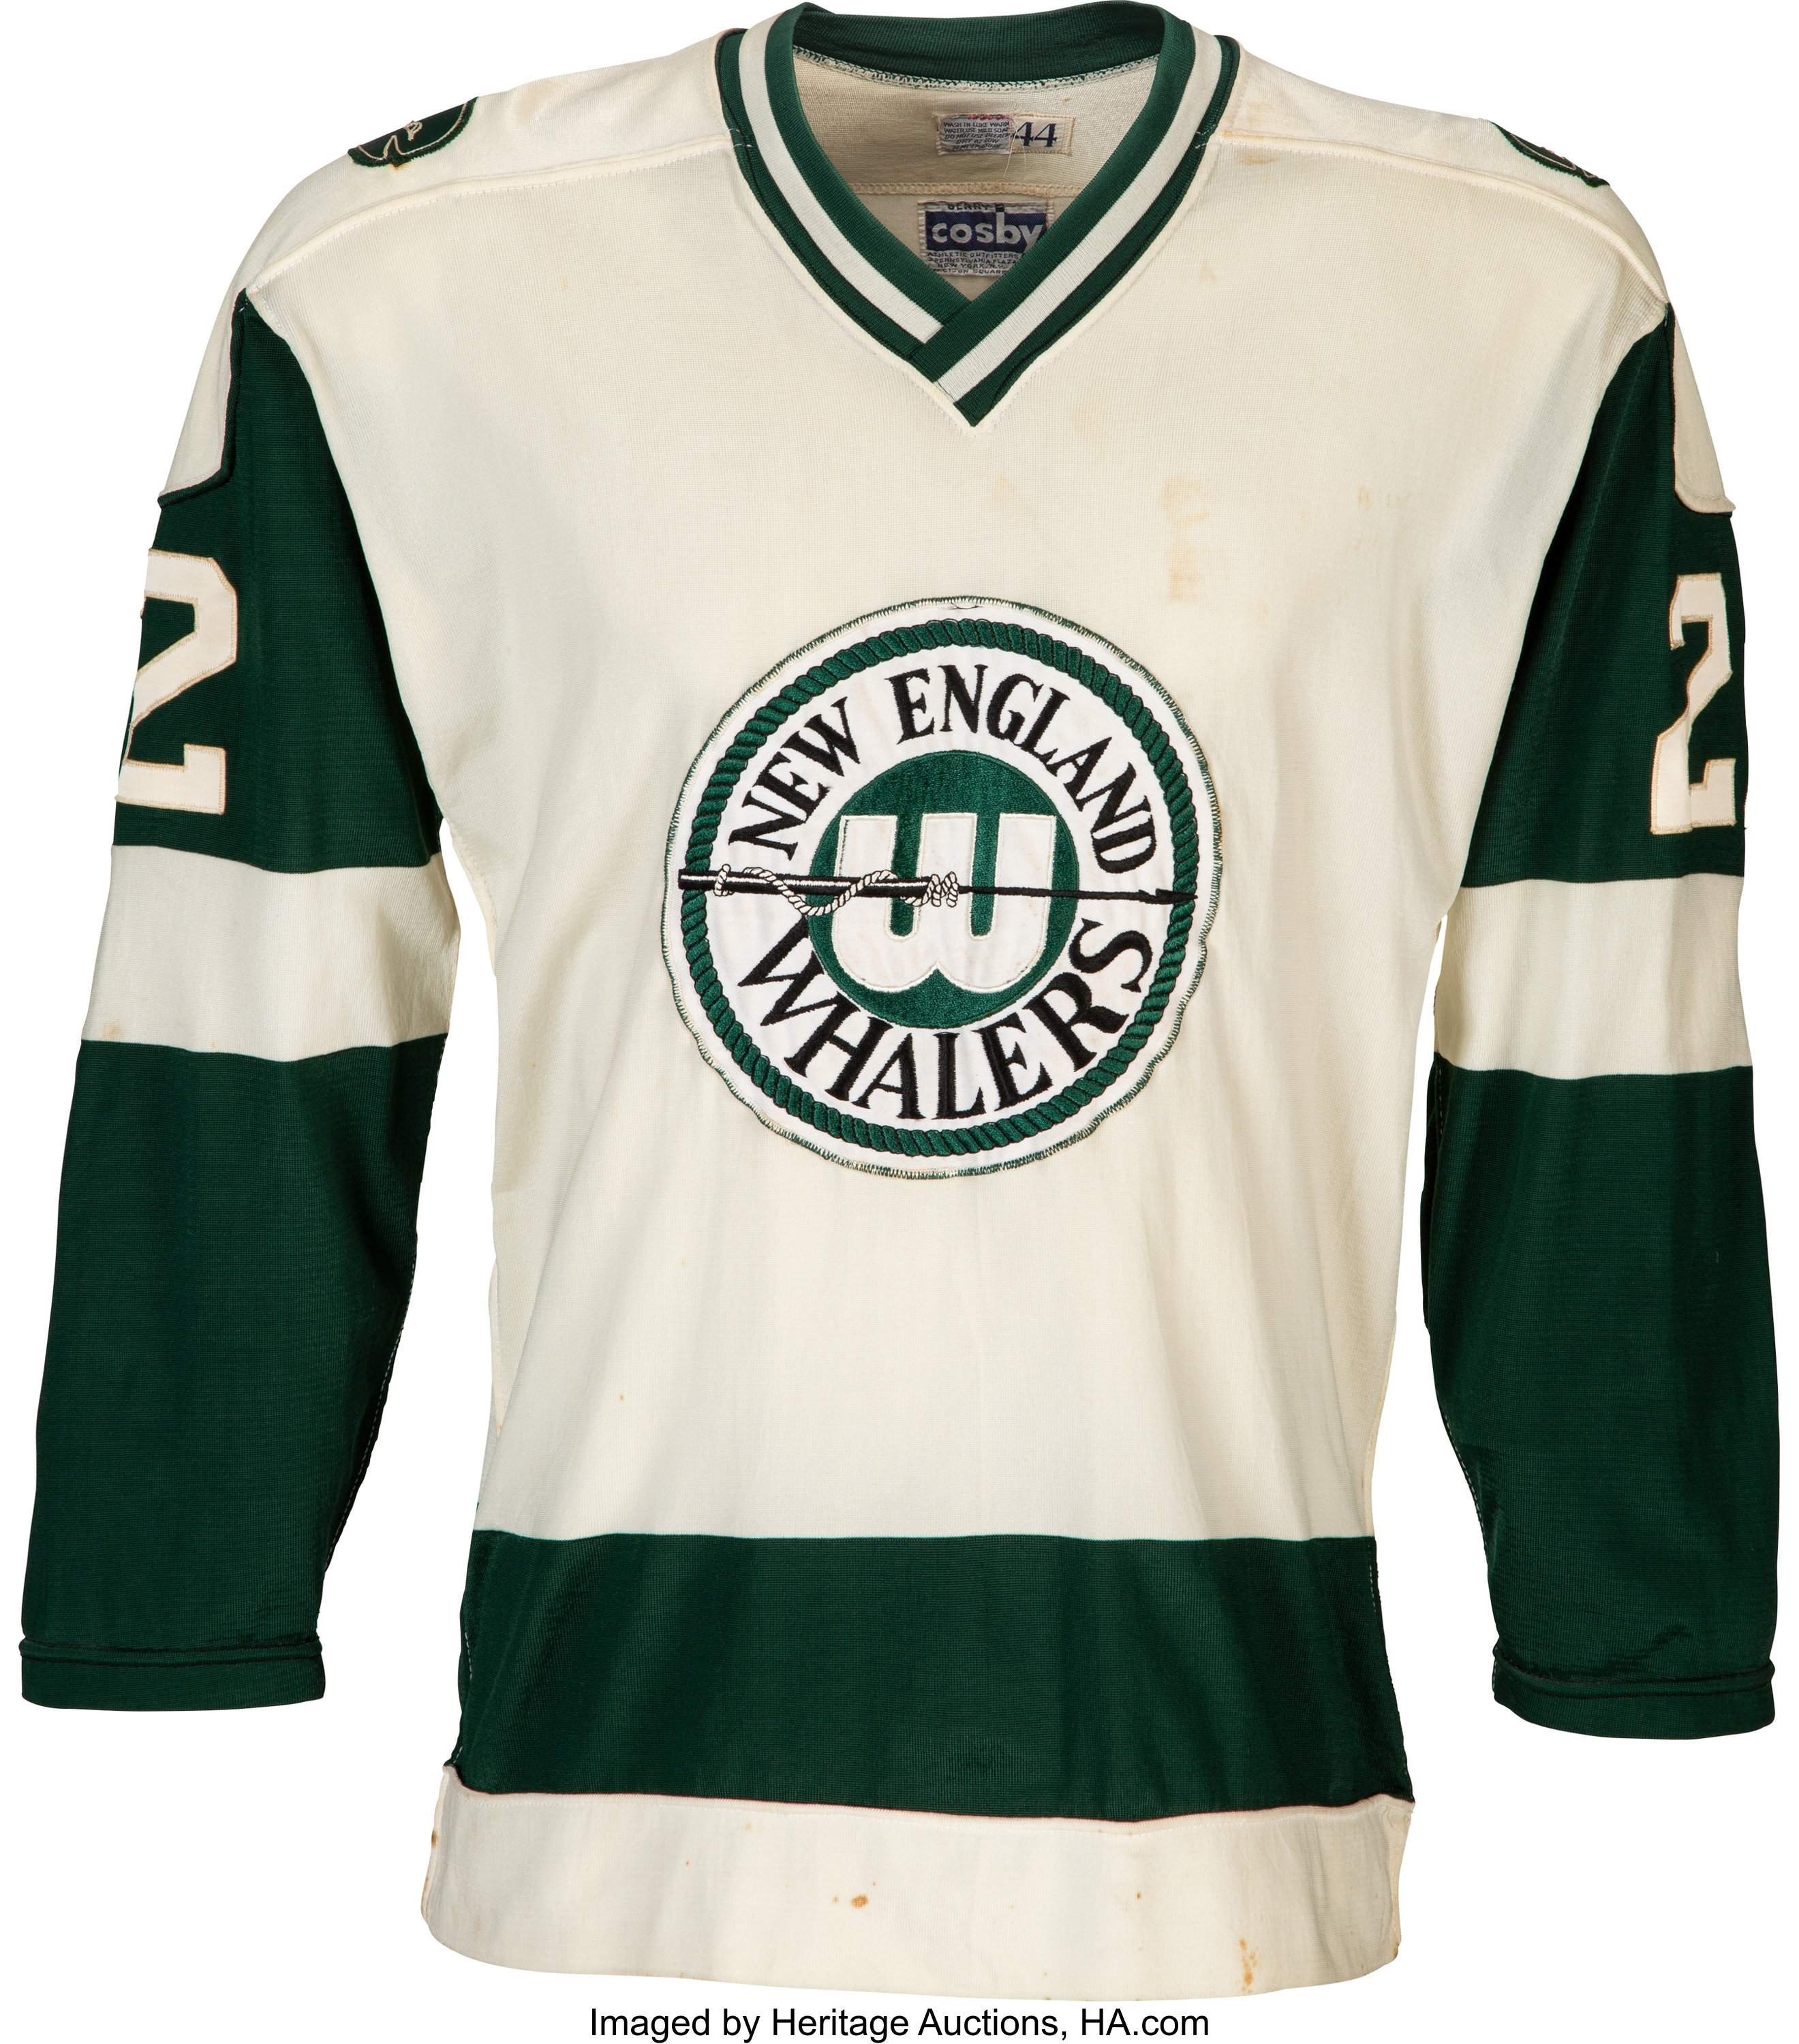 New England Whalers WHA white vintage hockey jersey